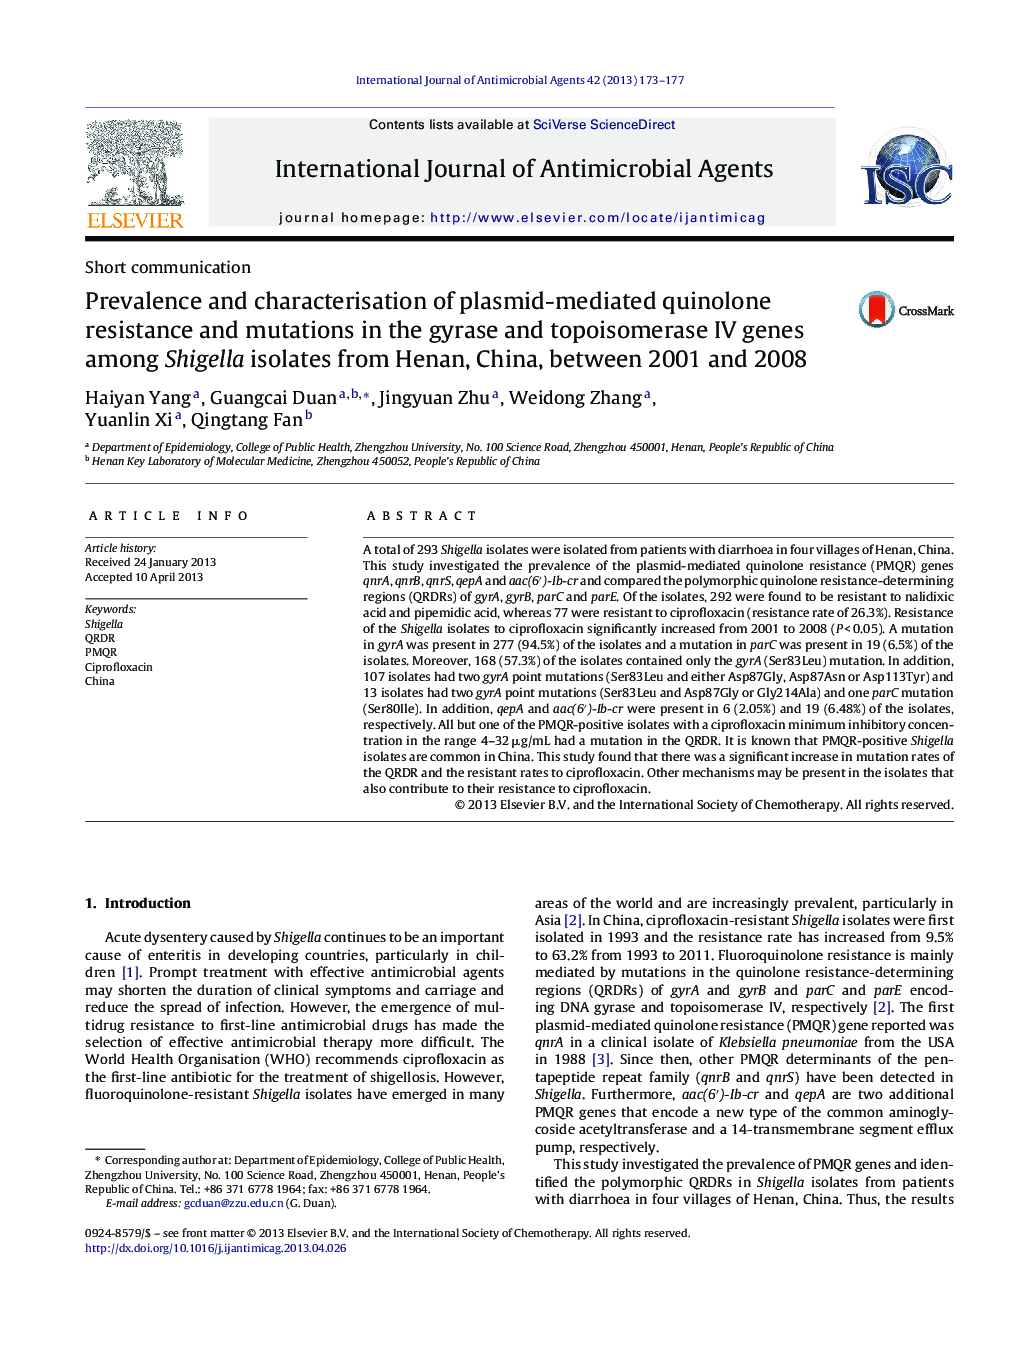 Prevalence and characterisation of plasmid-mediated quinolone resistance and mutations in the gyrase and topoisomerase IV genes among Shigella isolates from Henan, China, between 2001 and 2008